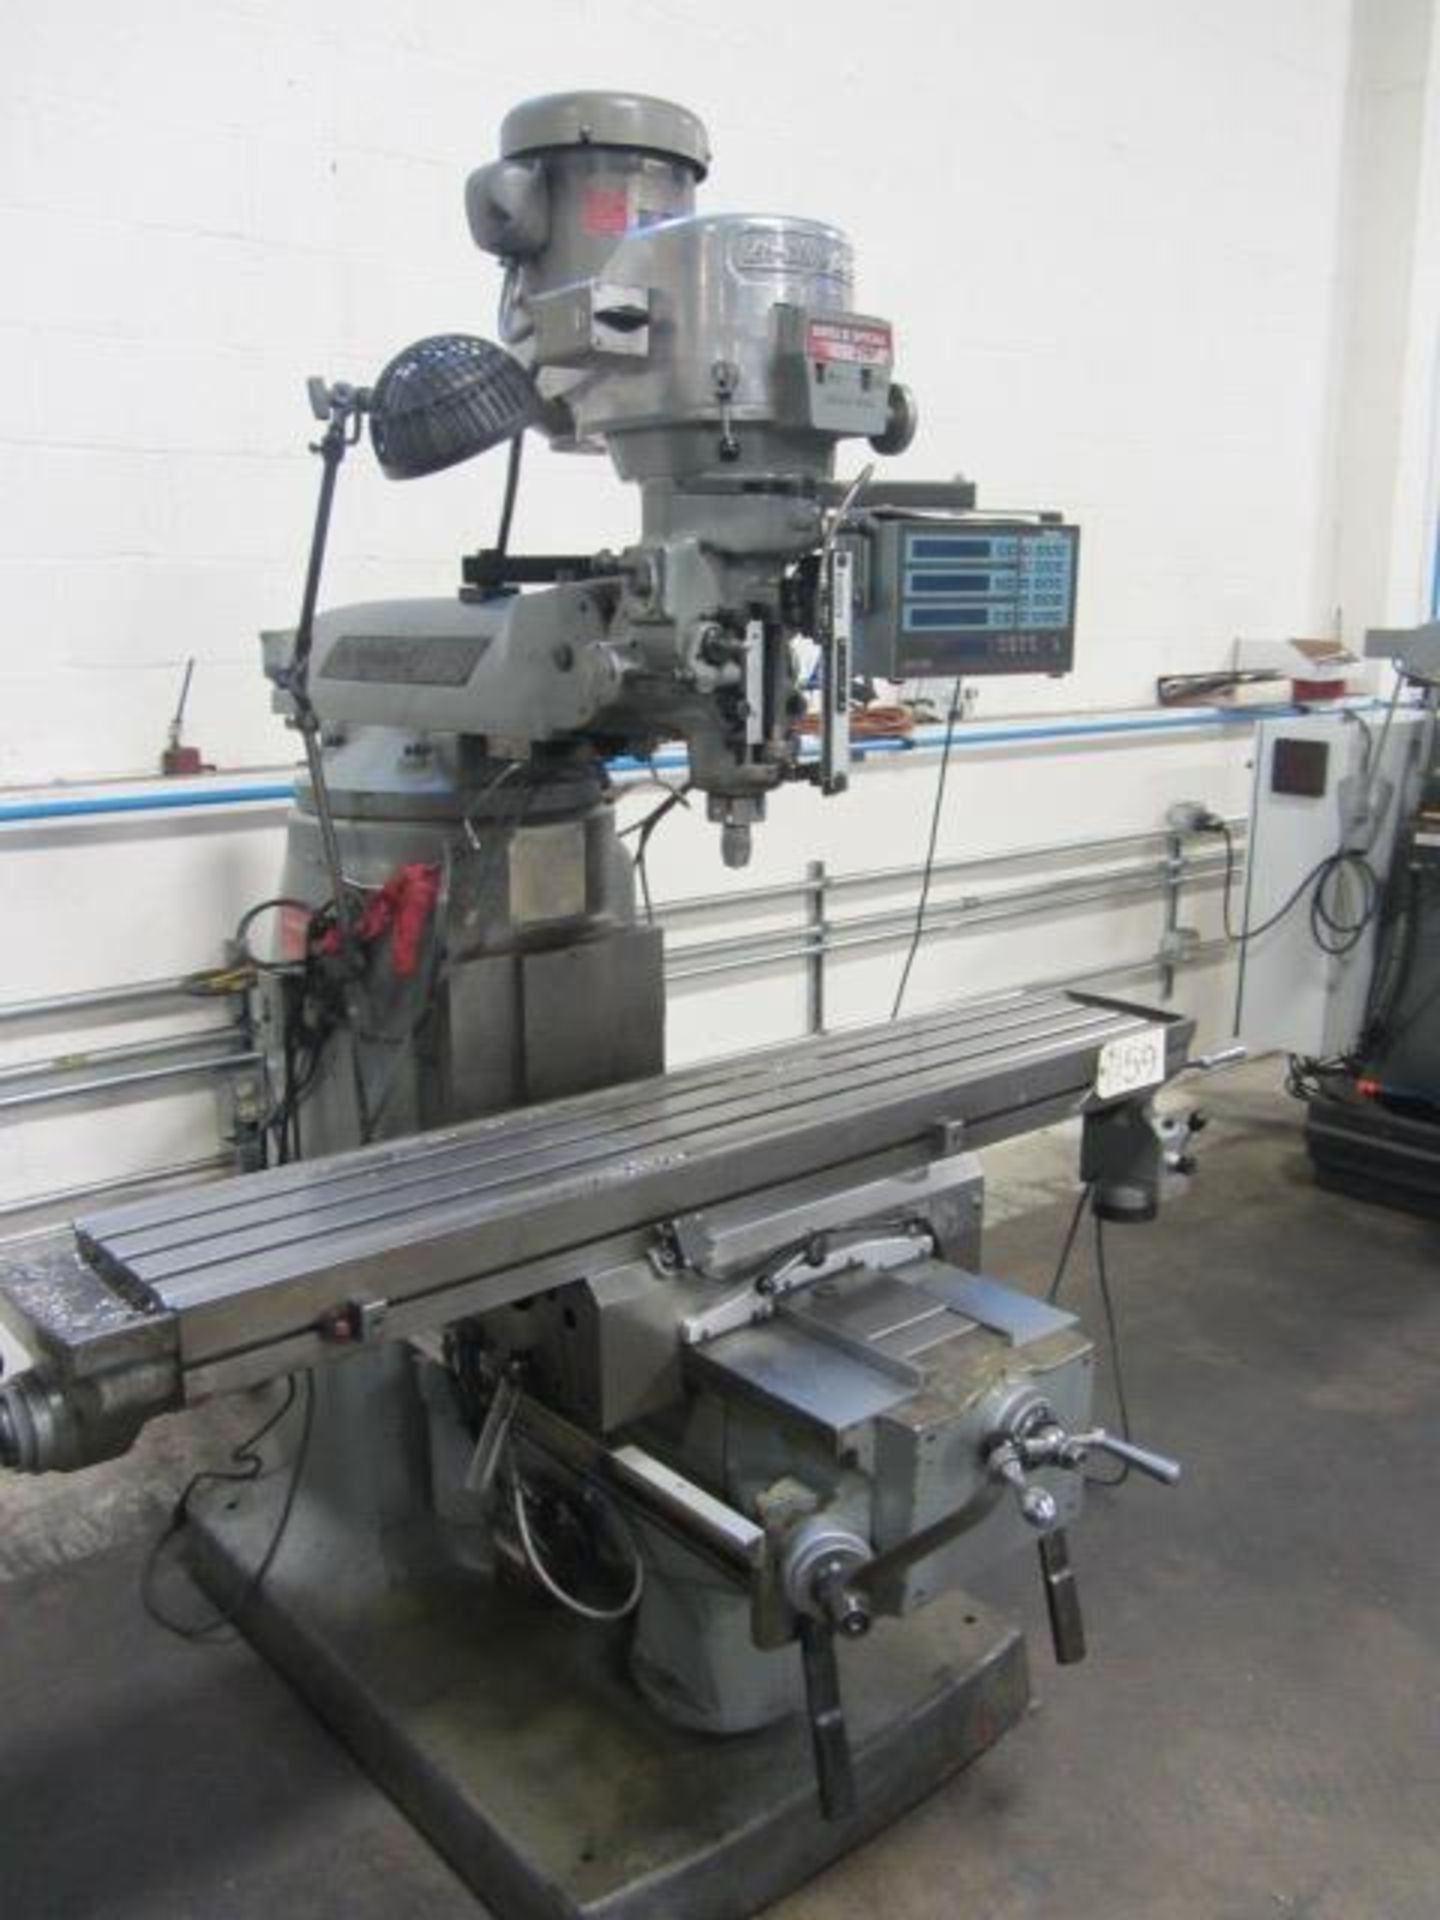 Bridgeport Series II Special Vertical Milling Machine with 11'' x 58'' Power Feed Table, R-8 Spindle - Image 5 of 7